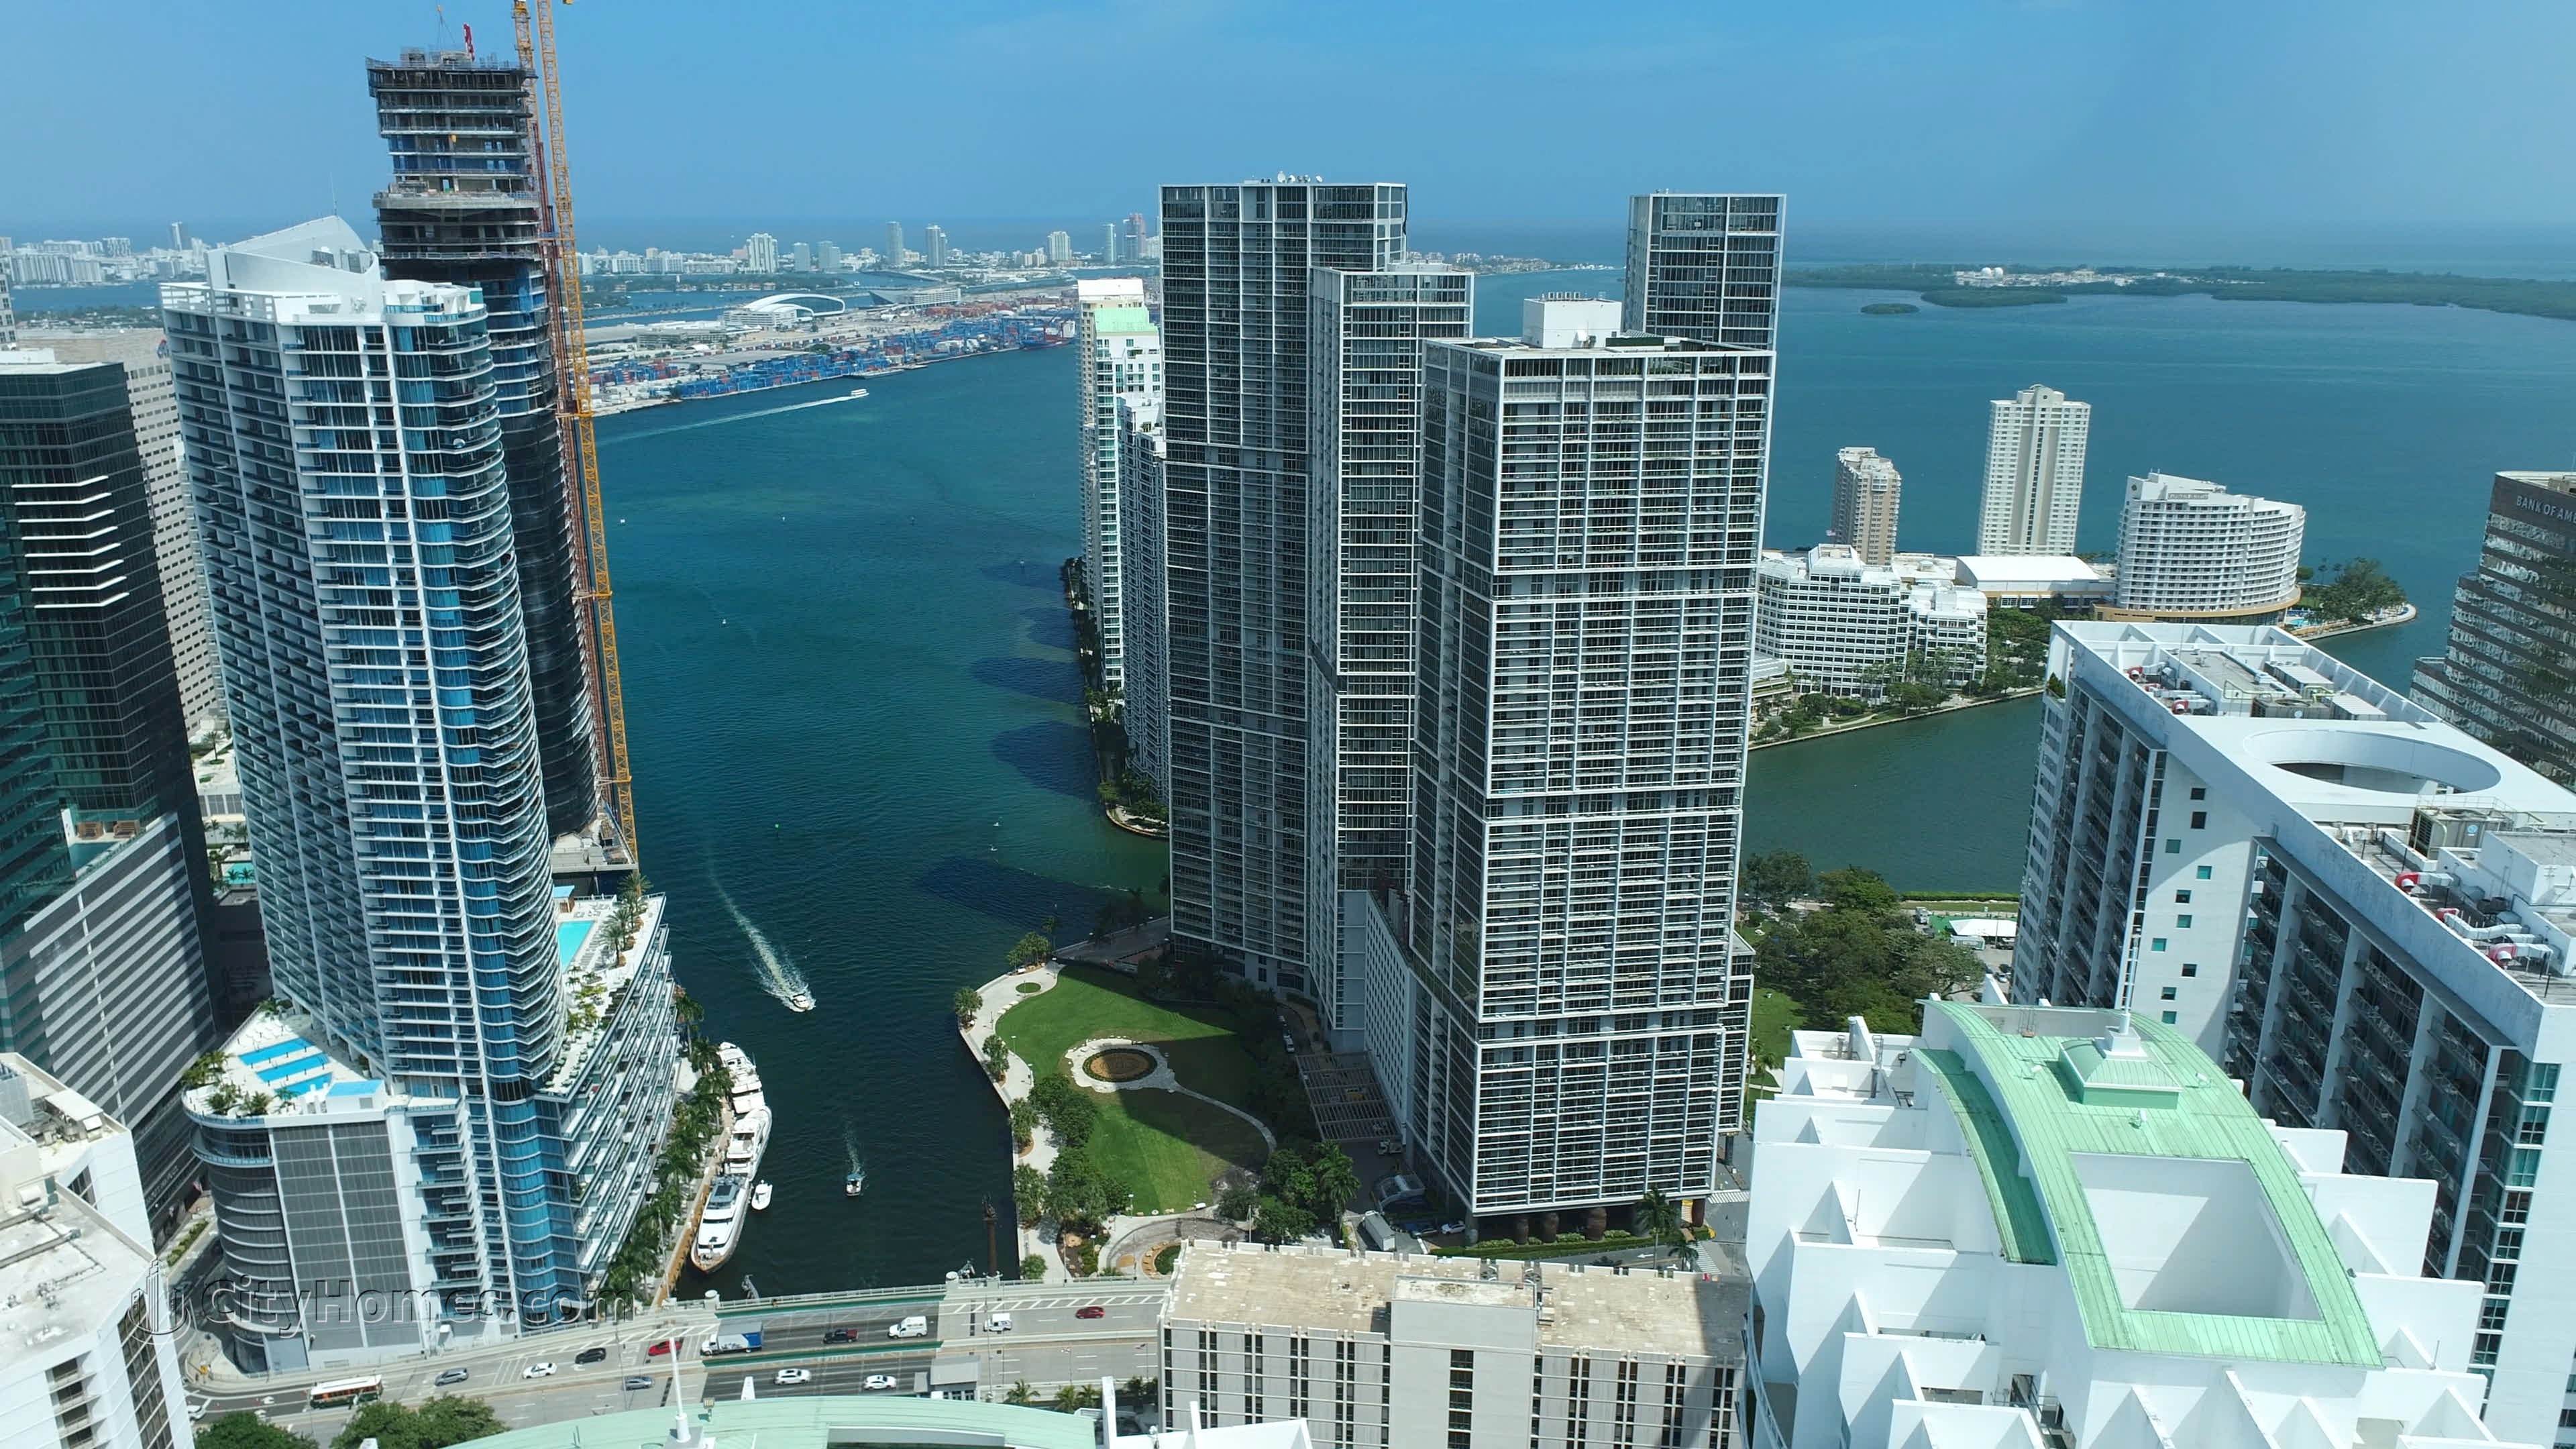 2. ICON Brickell Tower 1 κτίριο σε 465 And 475 Brickell Ave, Miami, FL 33131